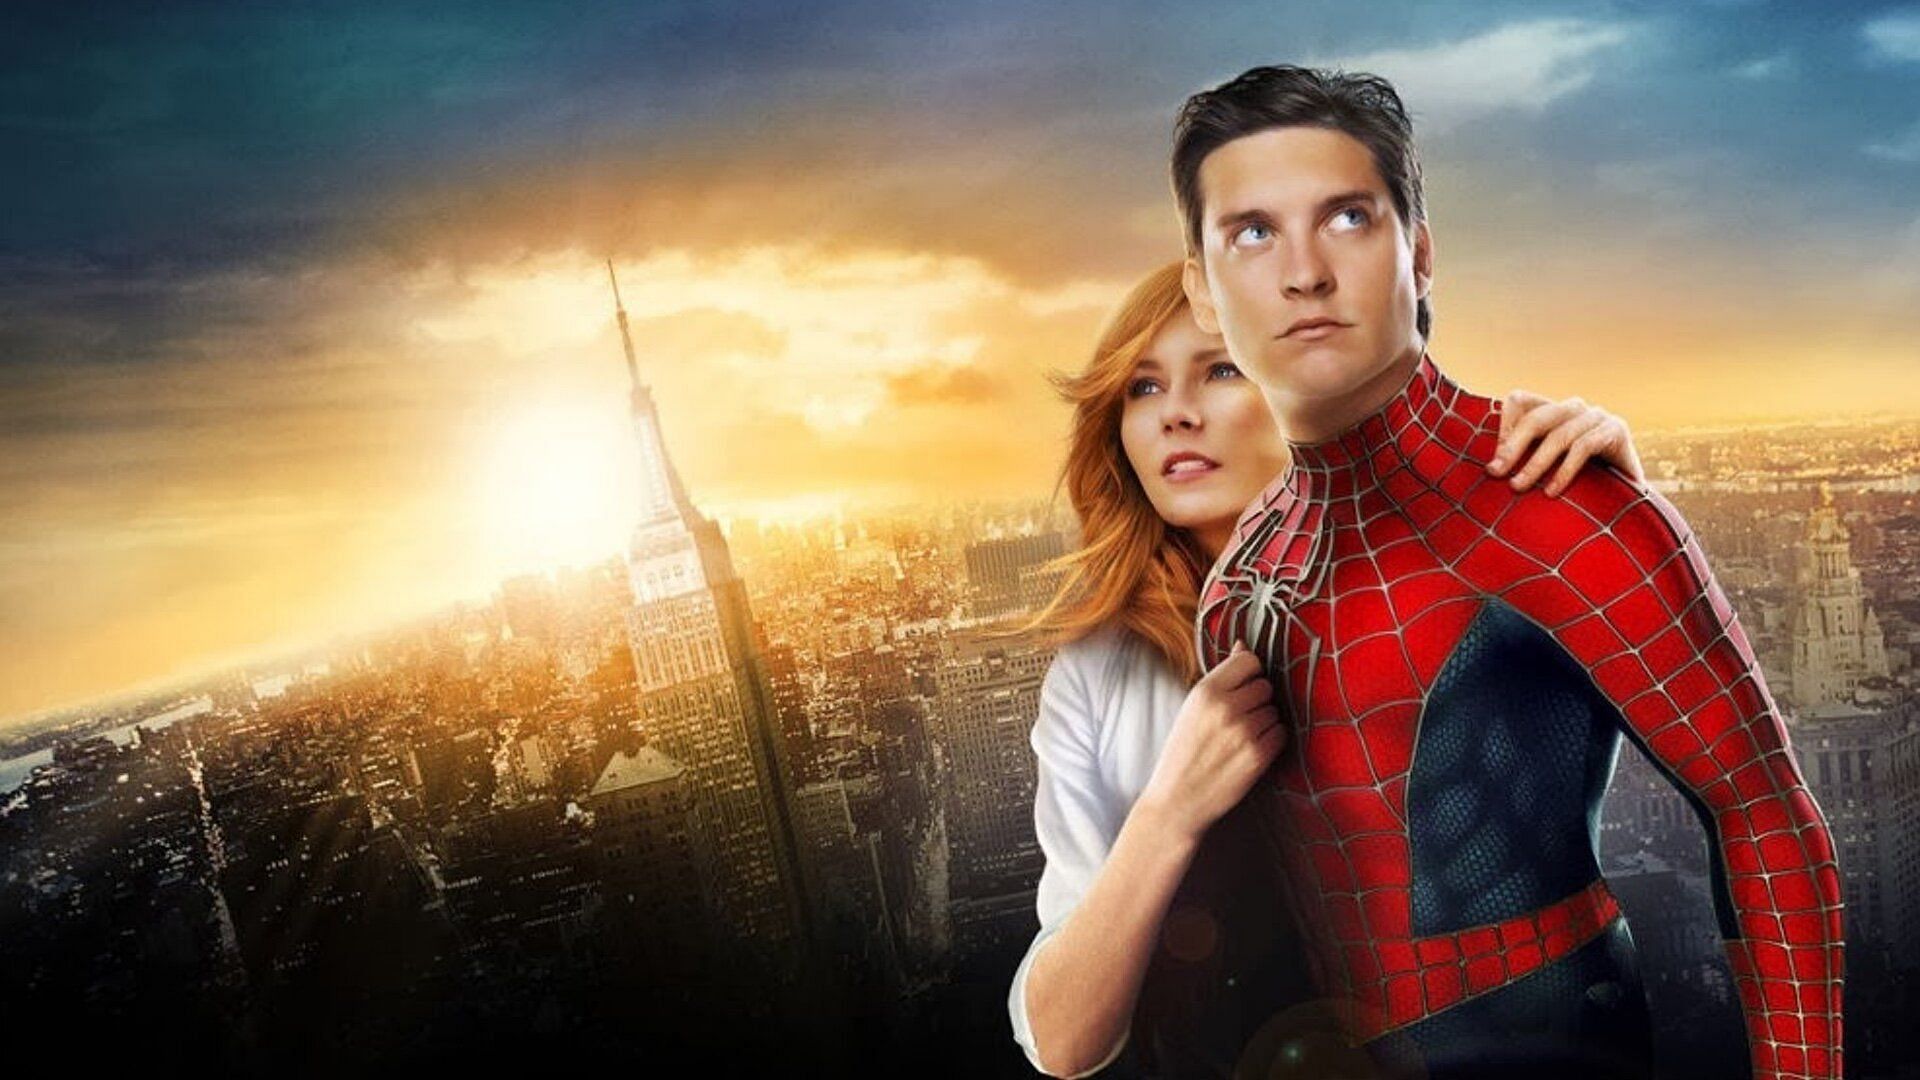 Maguire and Kirsten Dunst in Spider-Man 2 (Image via Sony)